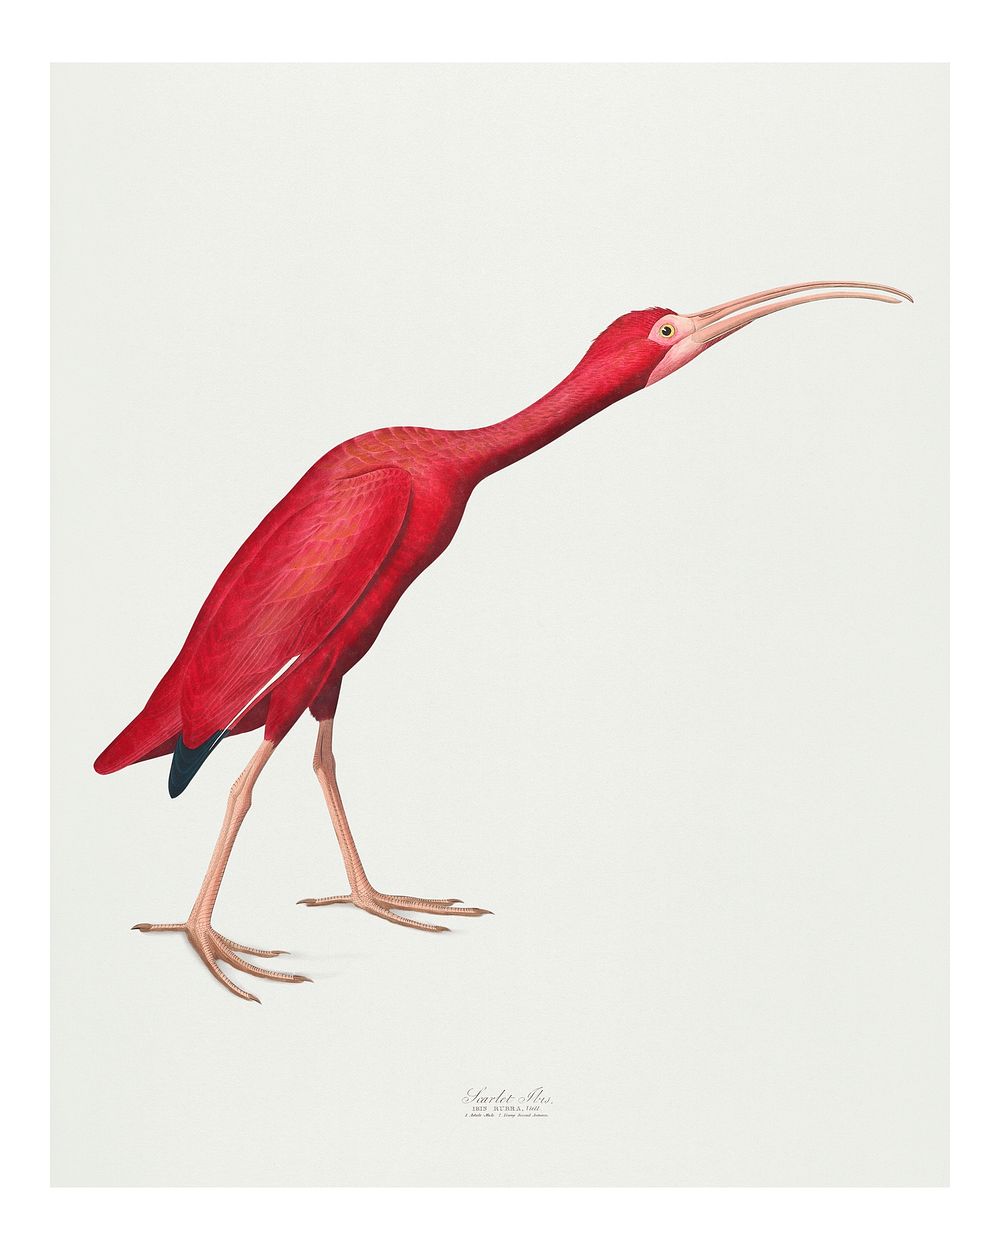 Vintage Scarlet Ibis illustration wall art print and poster.